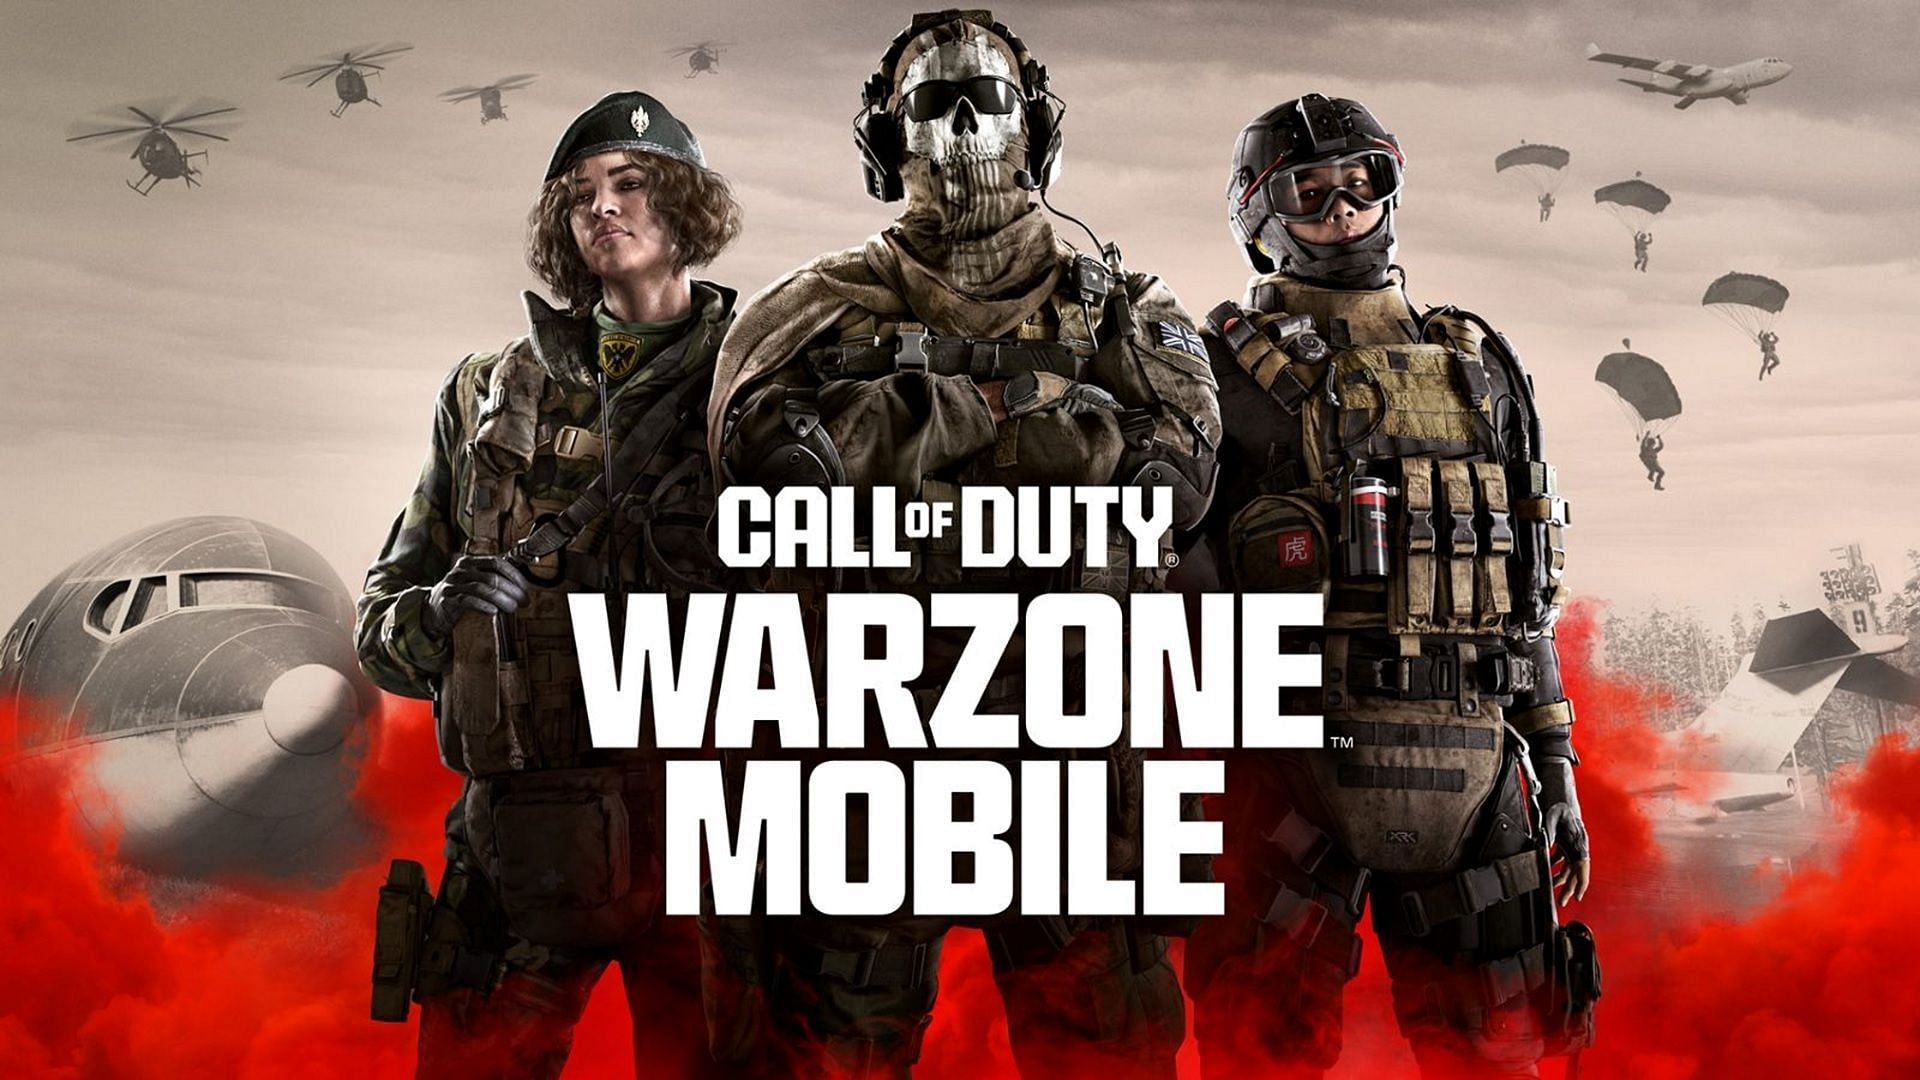 Call of Duty Warzone Mobile (Image via Activision)